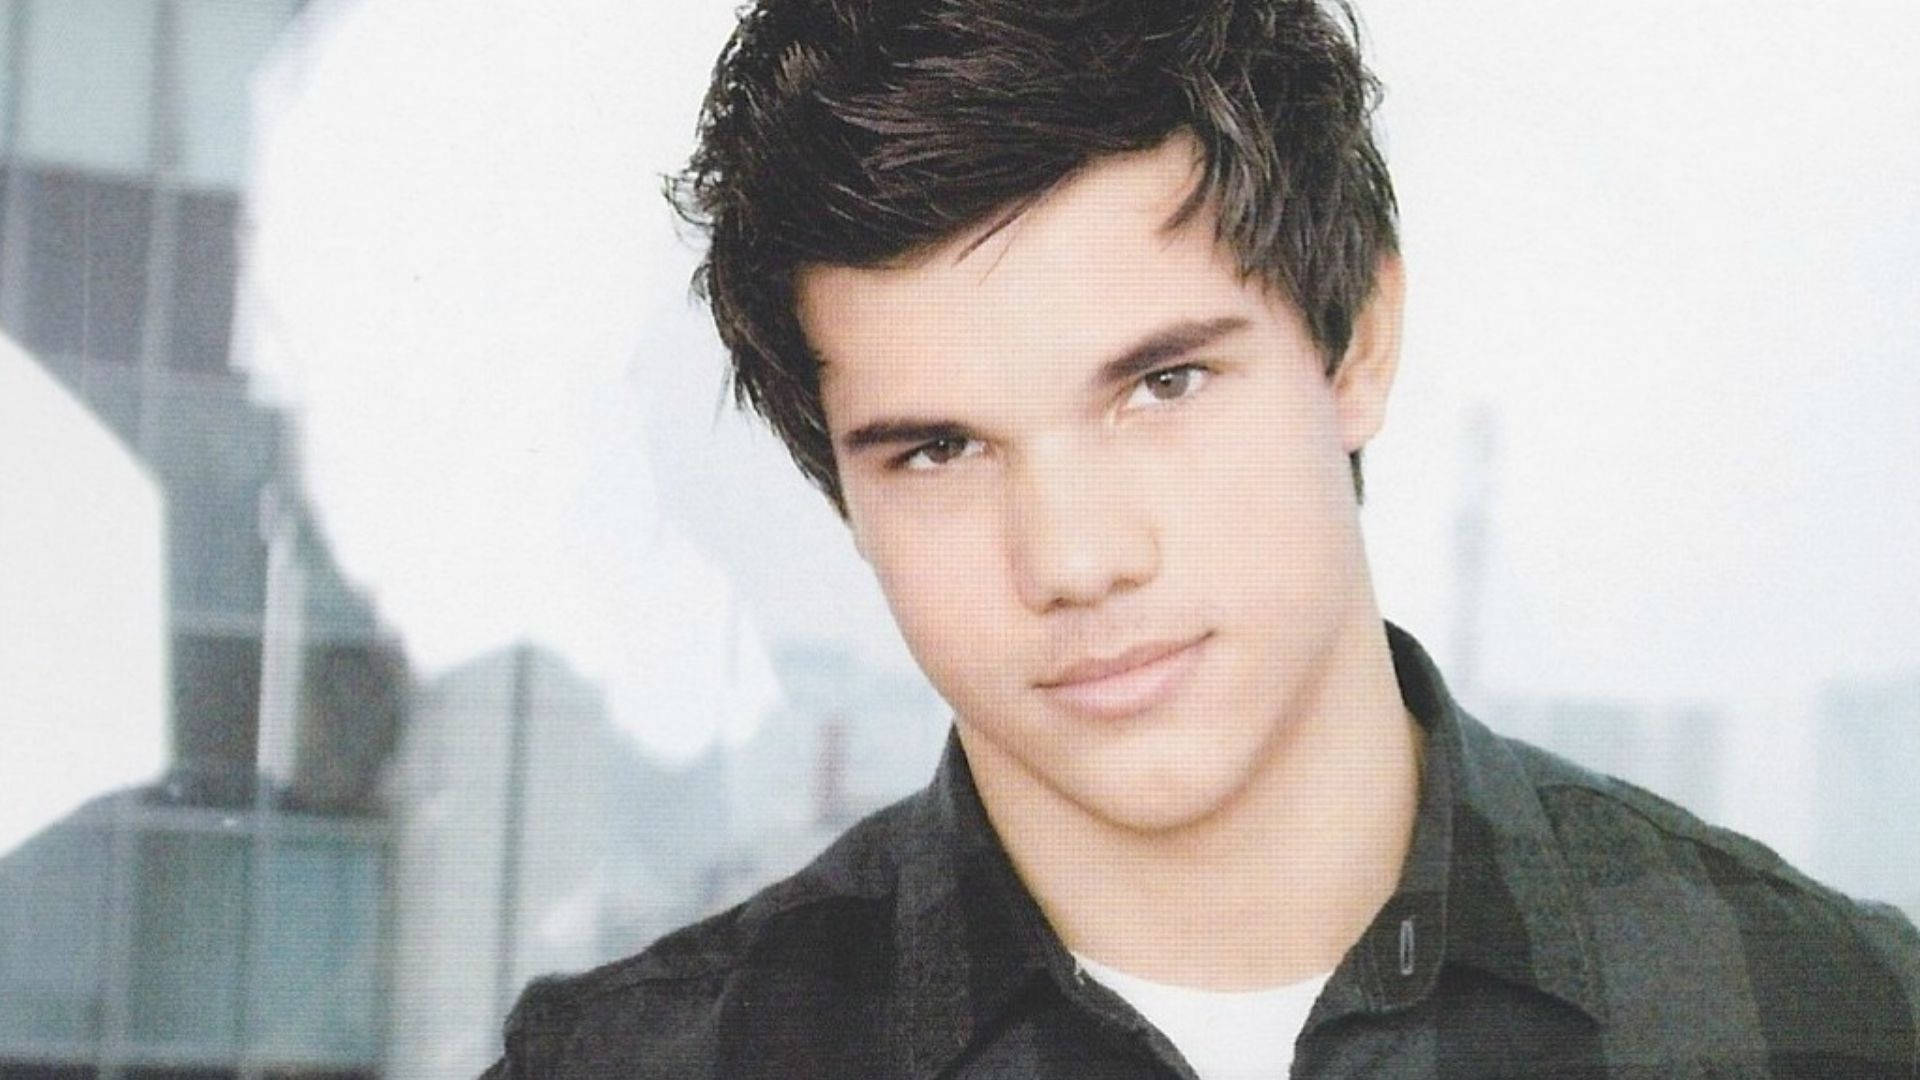 Cute Actor Taylor Lautner Background